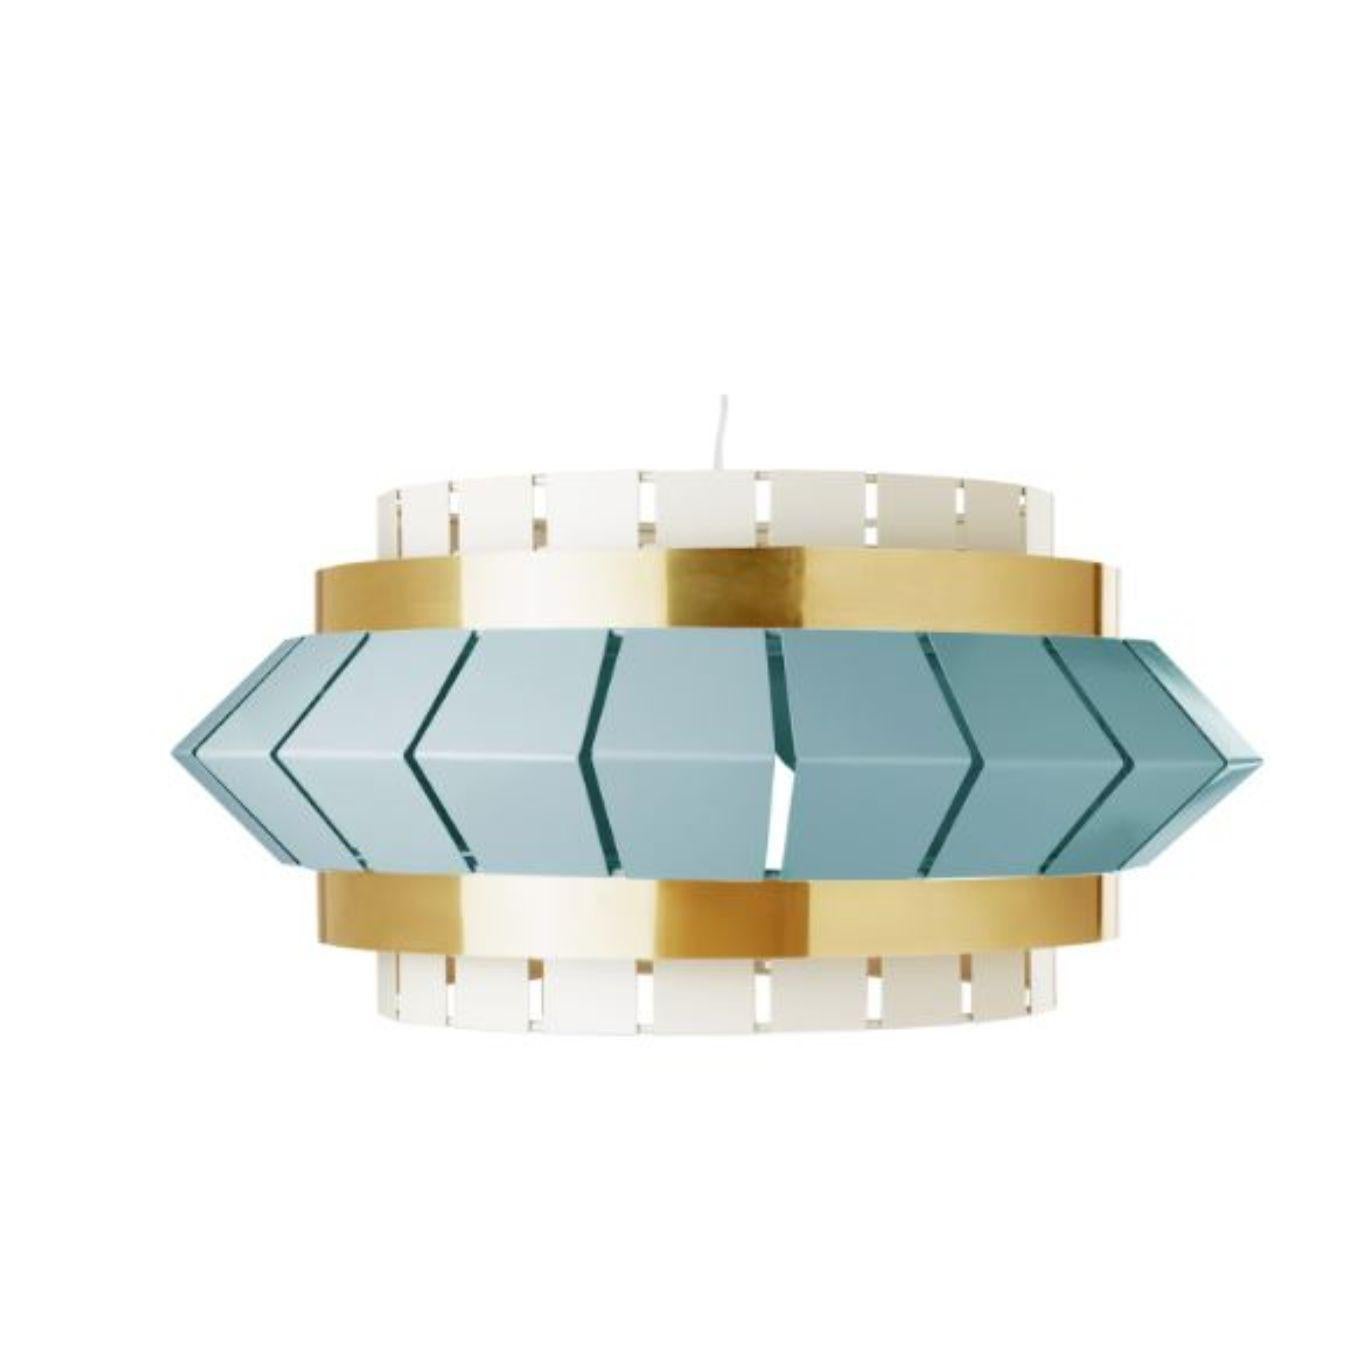 Ivory and Jade Comb I Suspension lamp with brass ring by Dooq
Dimensions: W 75 x D 75 x H 35 cm
Materials: lacquered metal, polished brass.
Also available in different colors and materials.

Information:
230V/50Hz
E27/1x20W LED
120V/60Hz
E26/1x15W